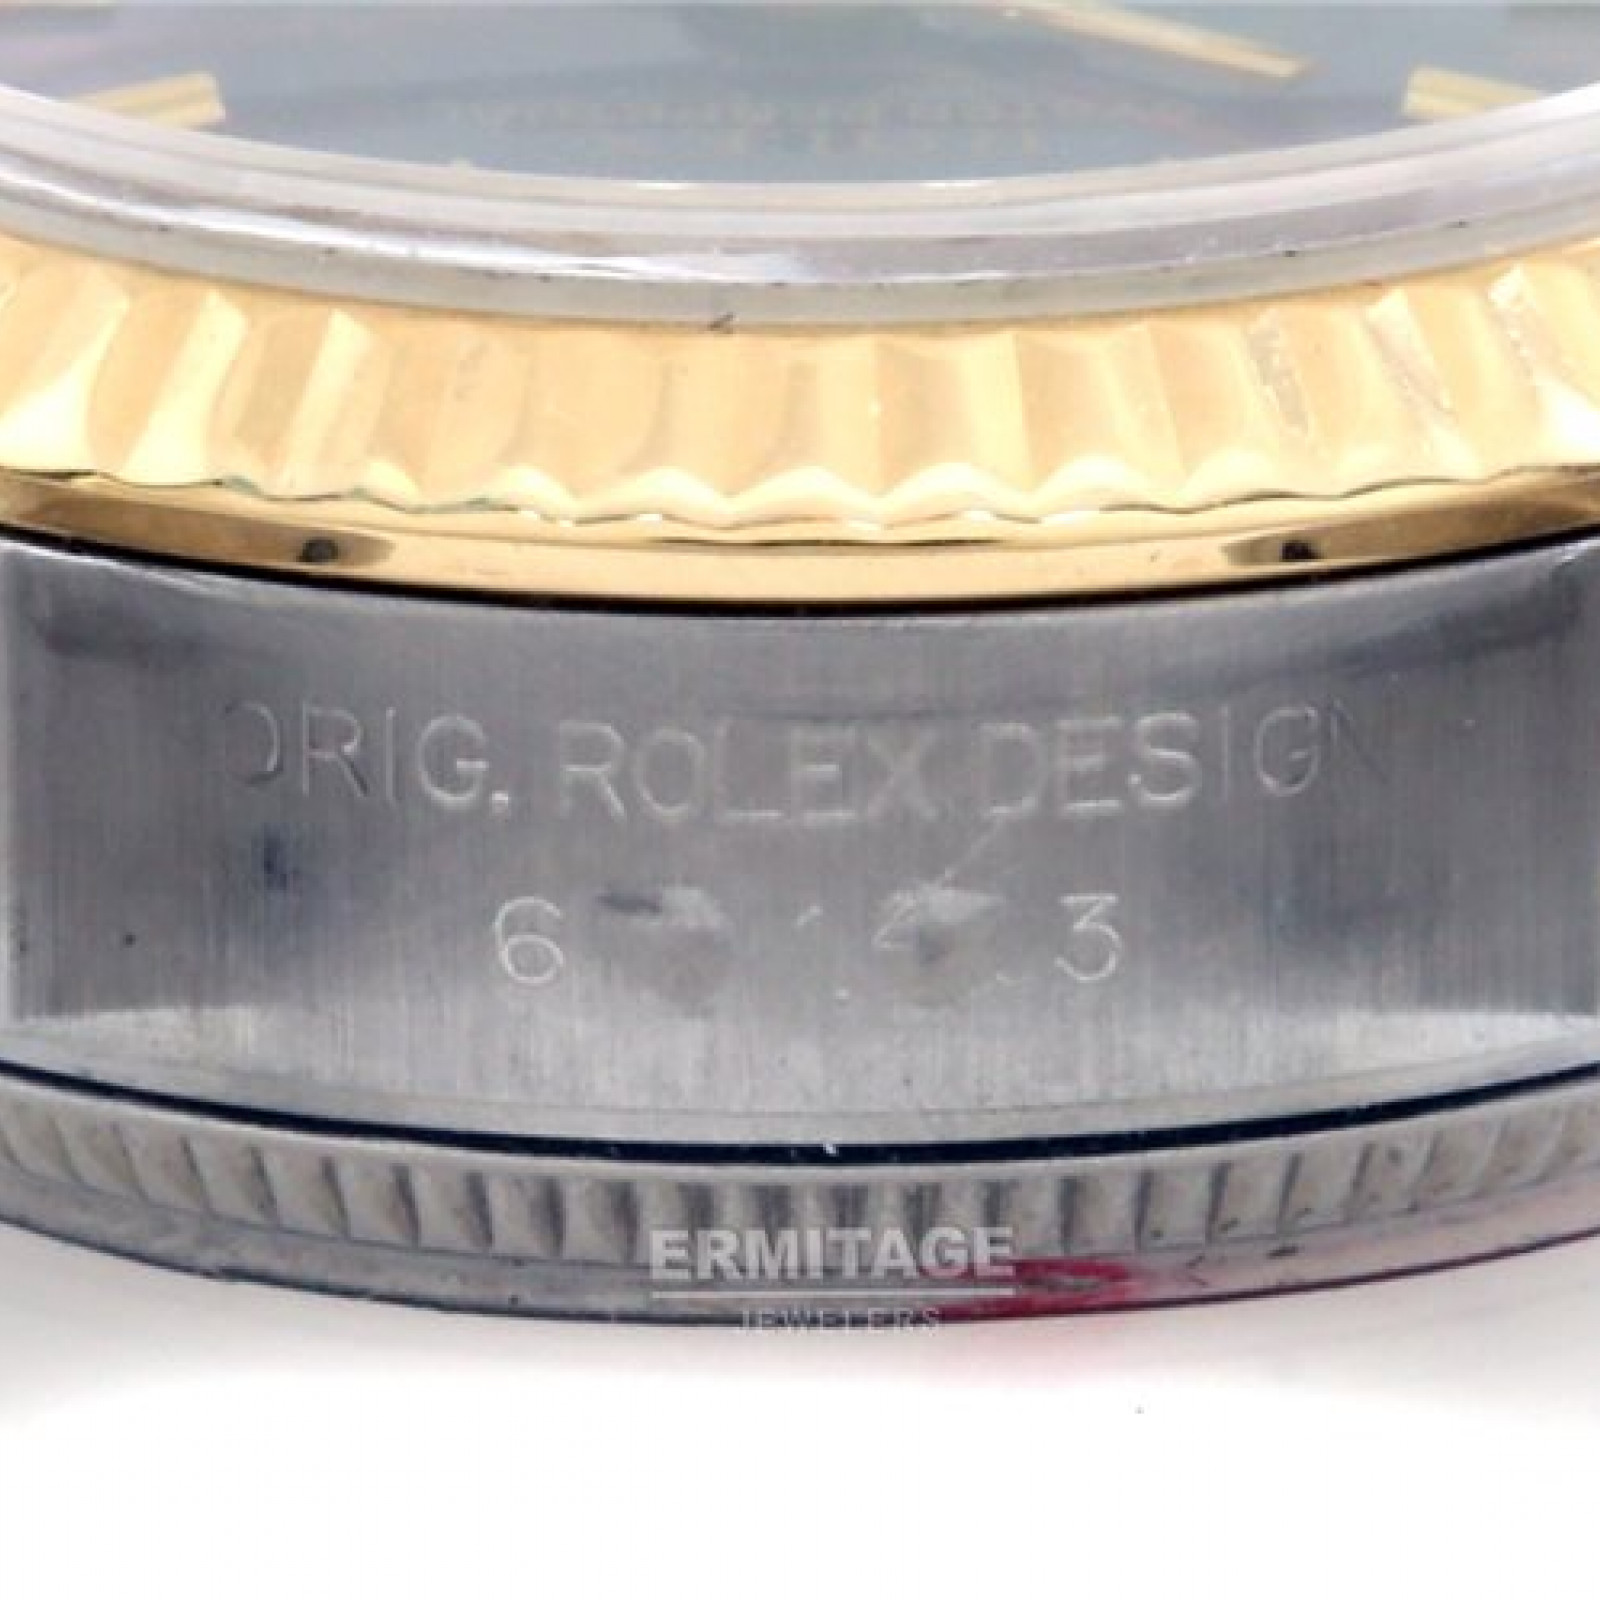 Rolex Oyster Perpetual 67193 Gold & Steel